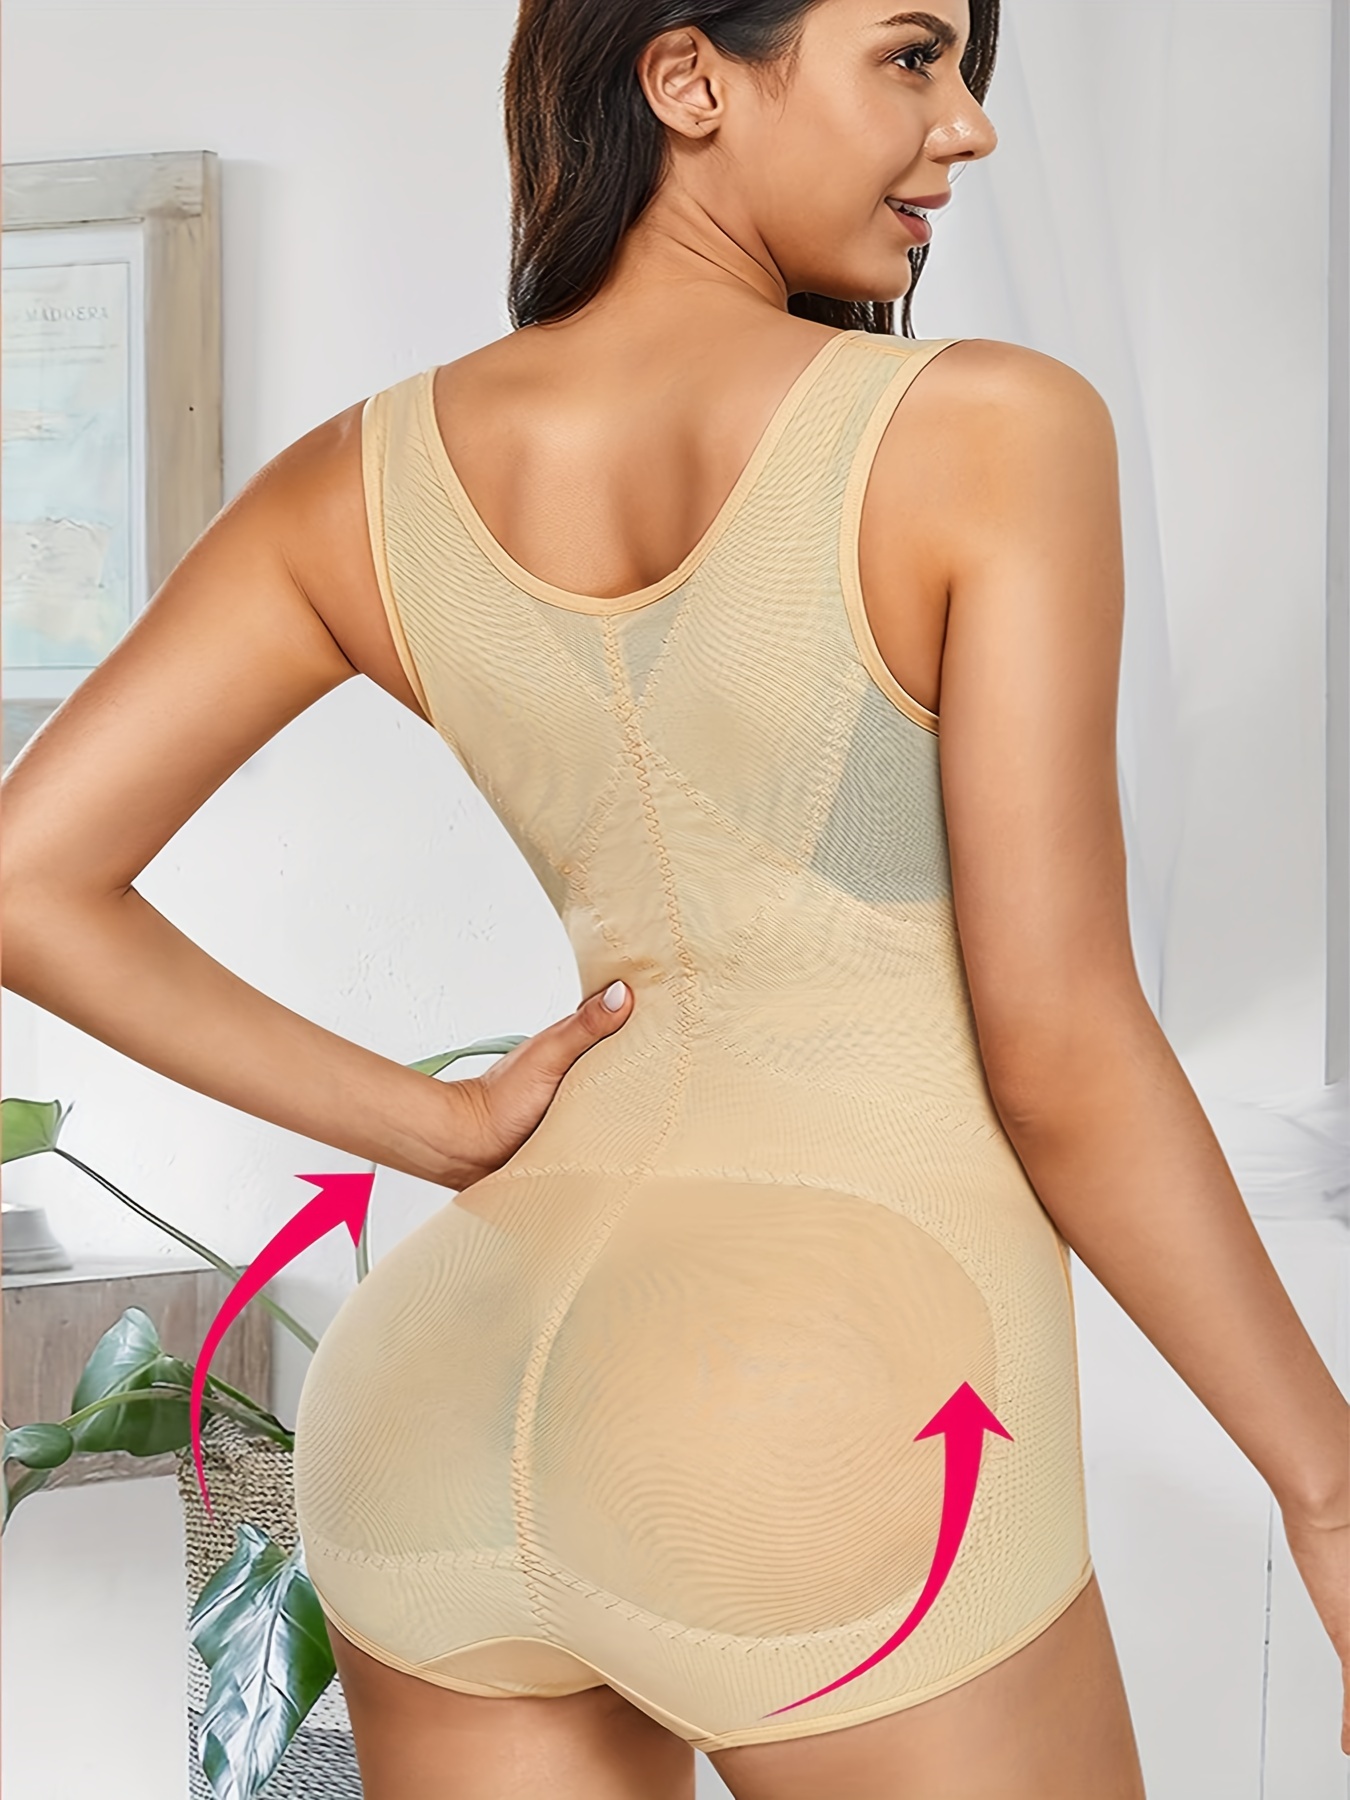  Spaghetti Strap Shapewear Bodysuit Camisole Jumpsuit Top for  Women Tummy-Control Slimming Butt Lifter Body Shaper Romper : Clothing,  Shoes & Jewelry